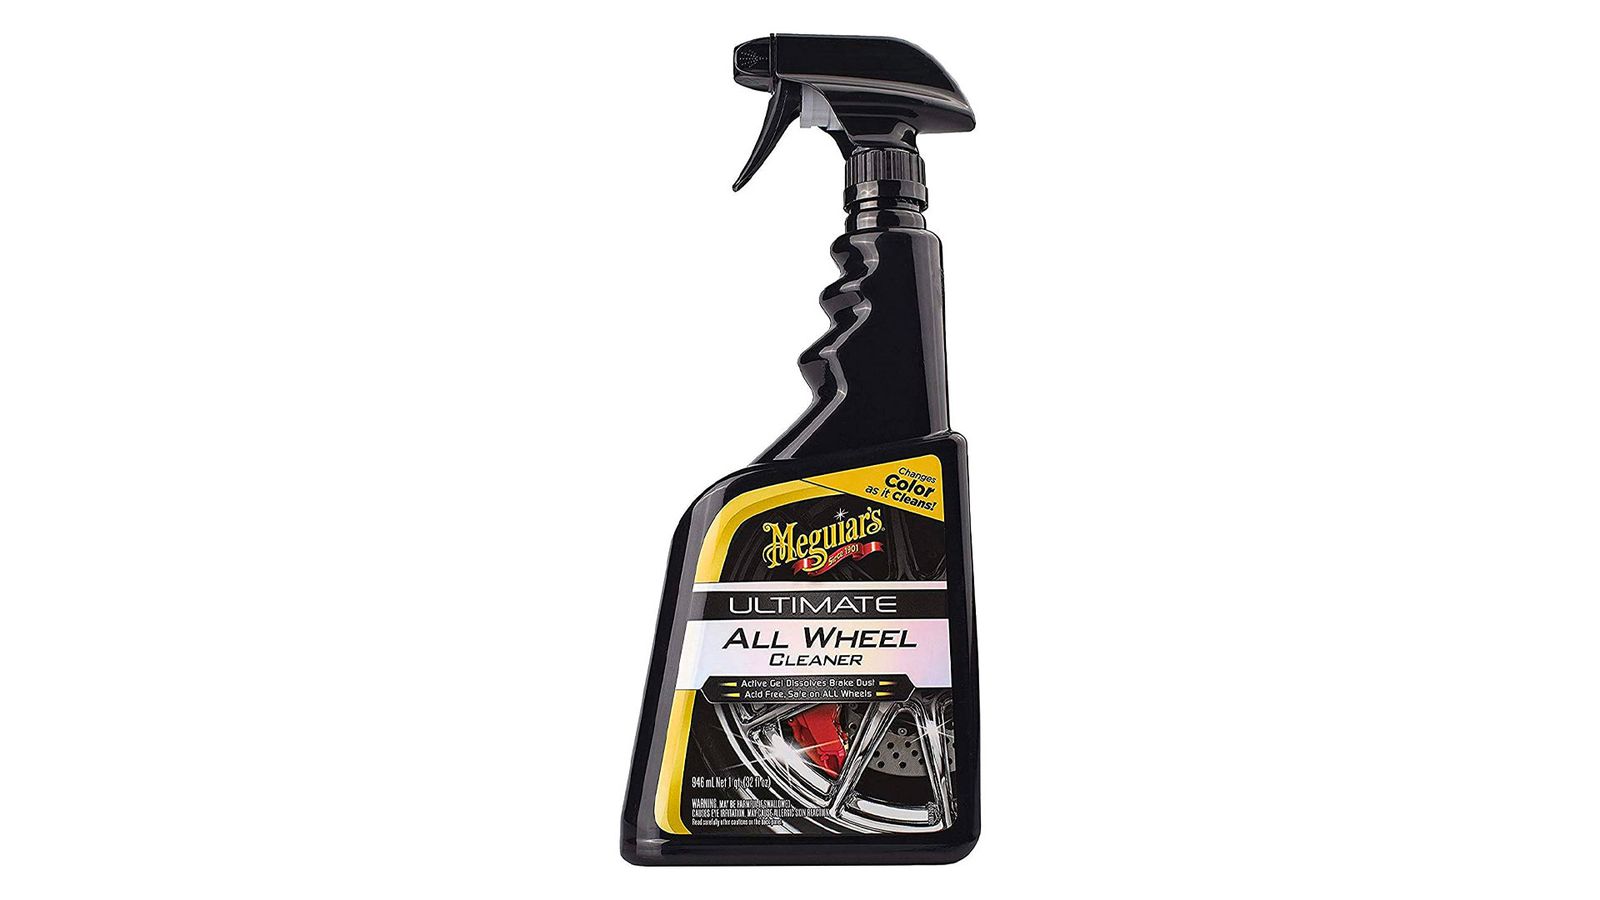 Meguiar's Ultimate All Wheel Cleaner product image of a black spray bottle with a golden yellow label and an image of an alloy wheel on the front.